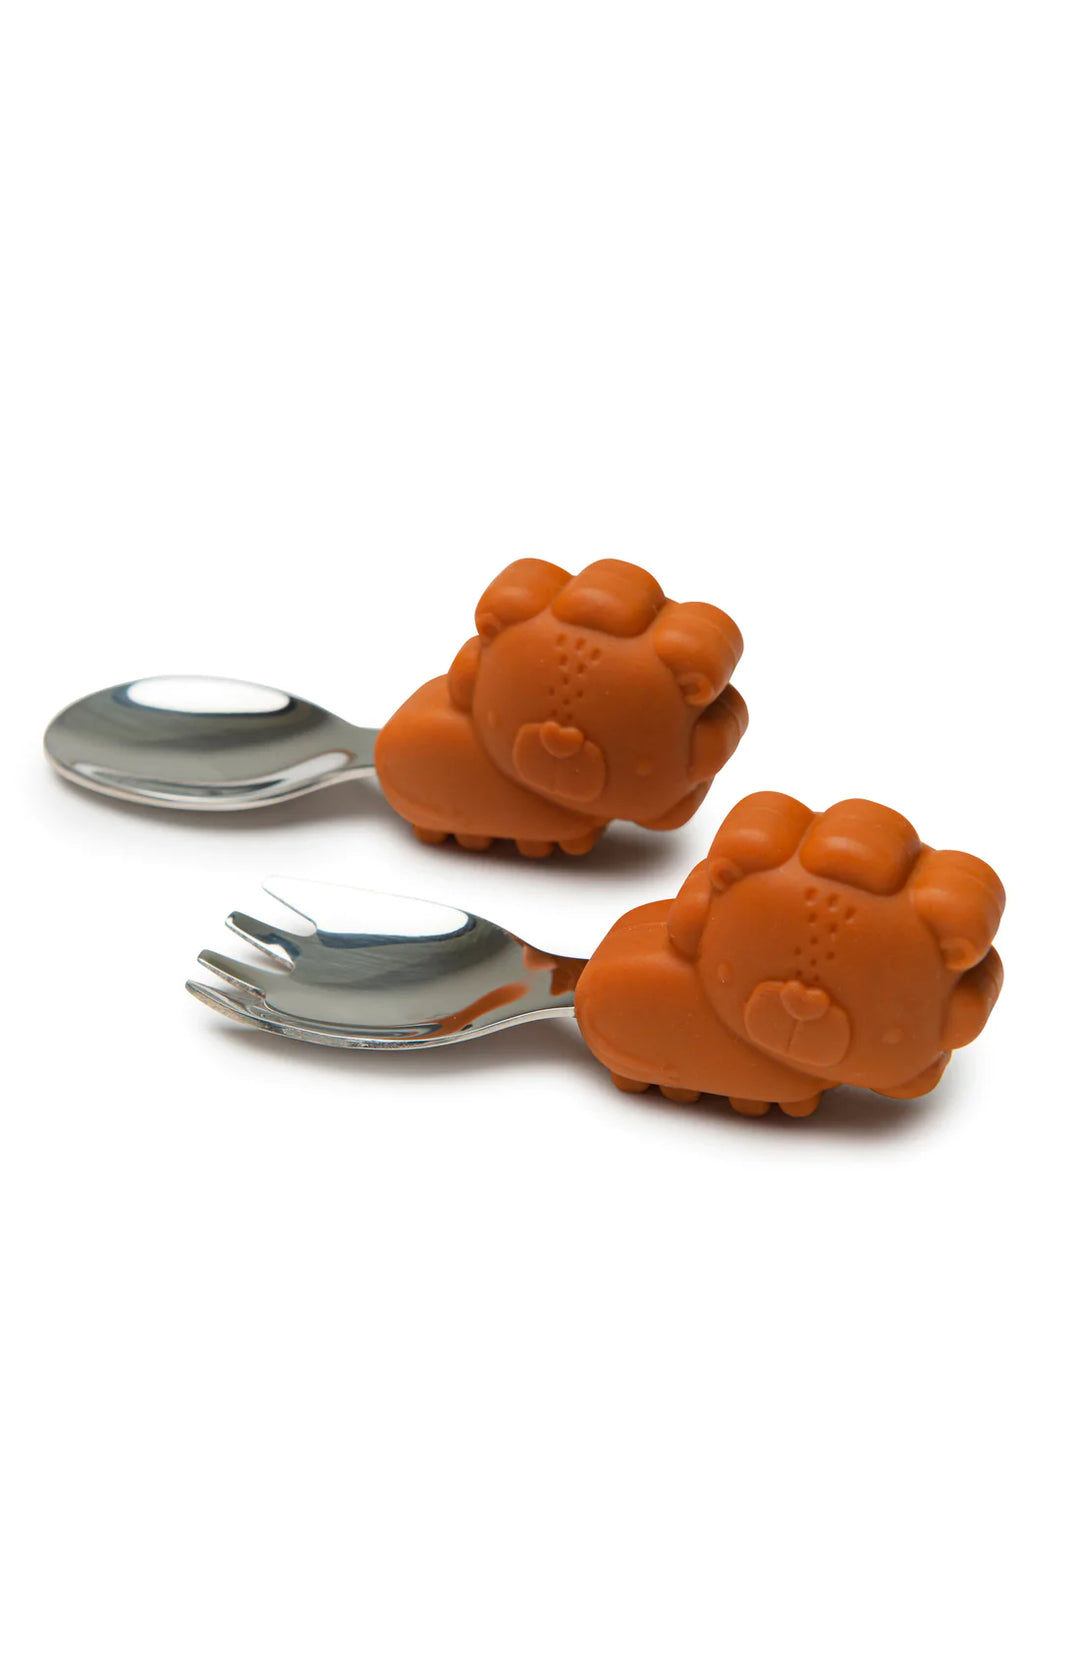 Lion Learning Spoon and Fork Set